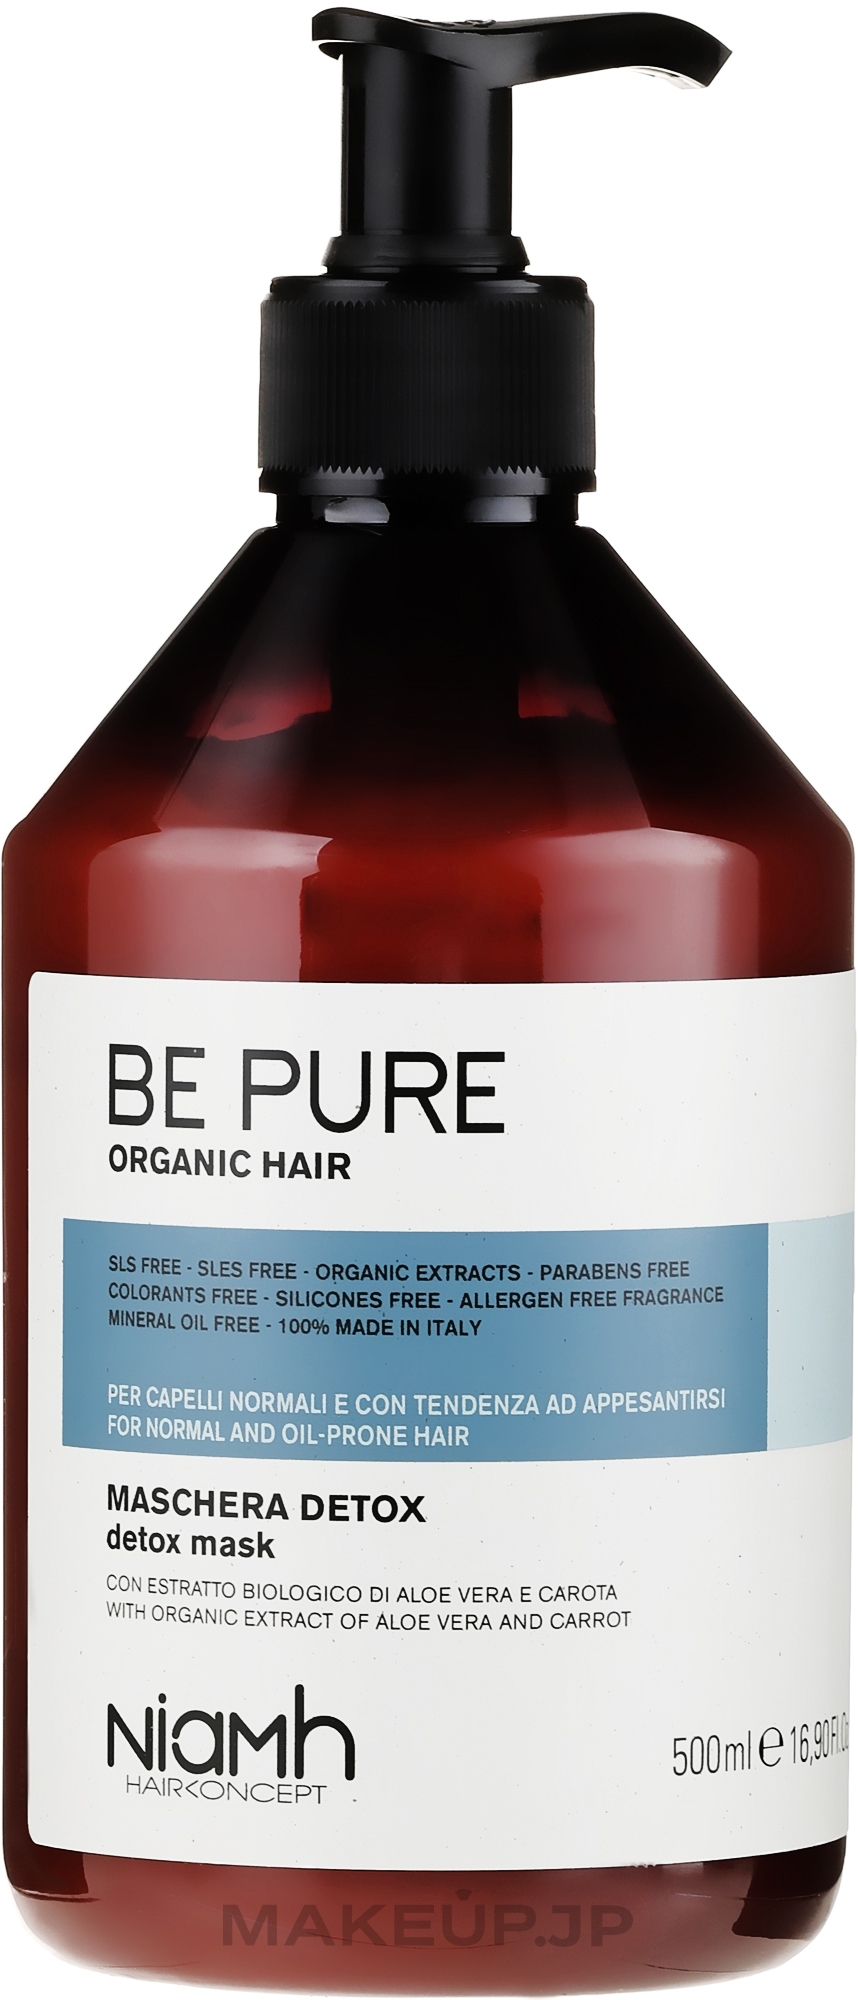 Mask for Oily Hair - Niamh Hairconcept Be Pure Detox Mask — photo 500 ml